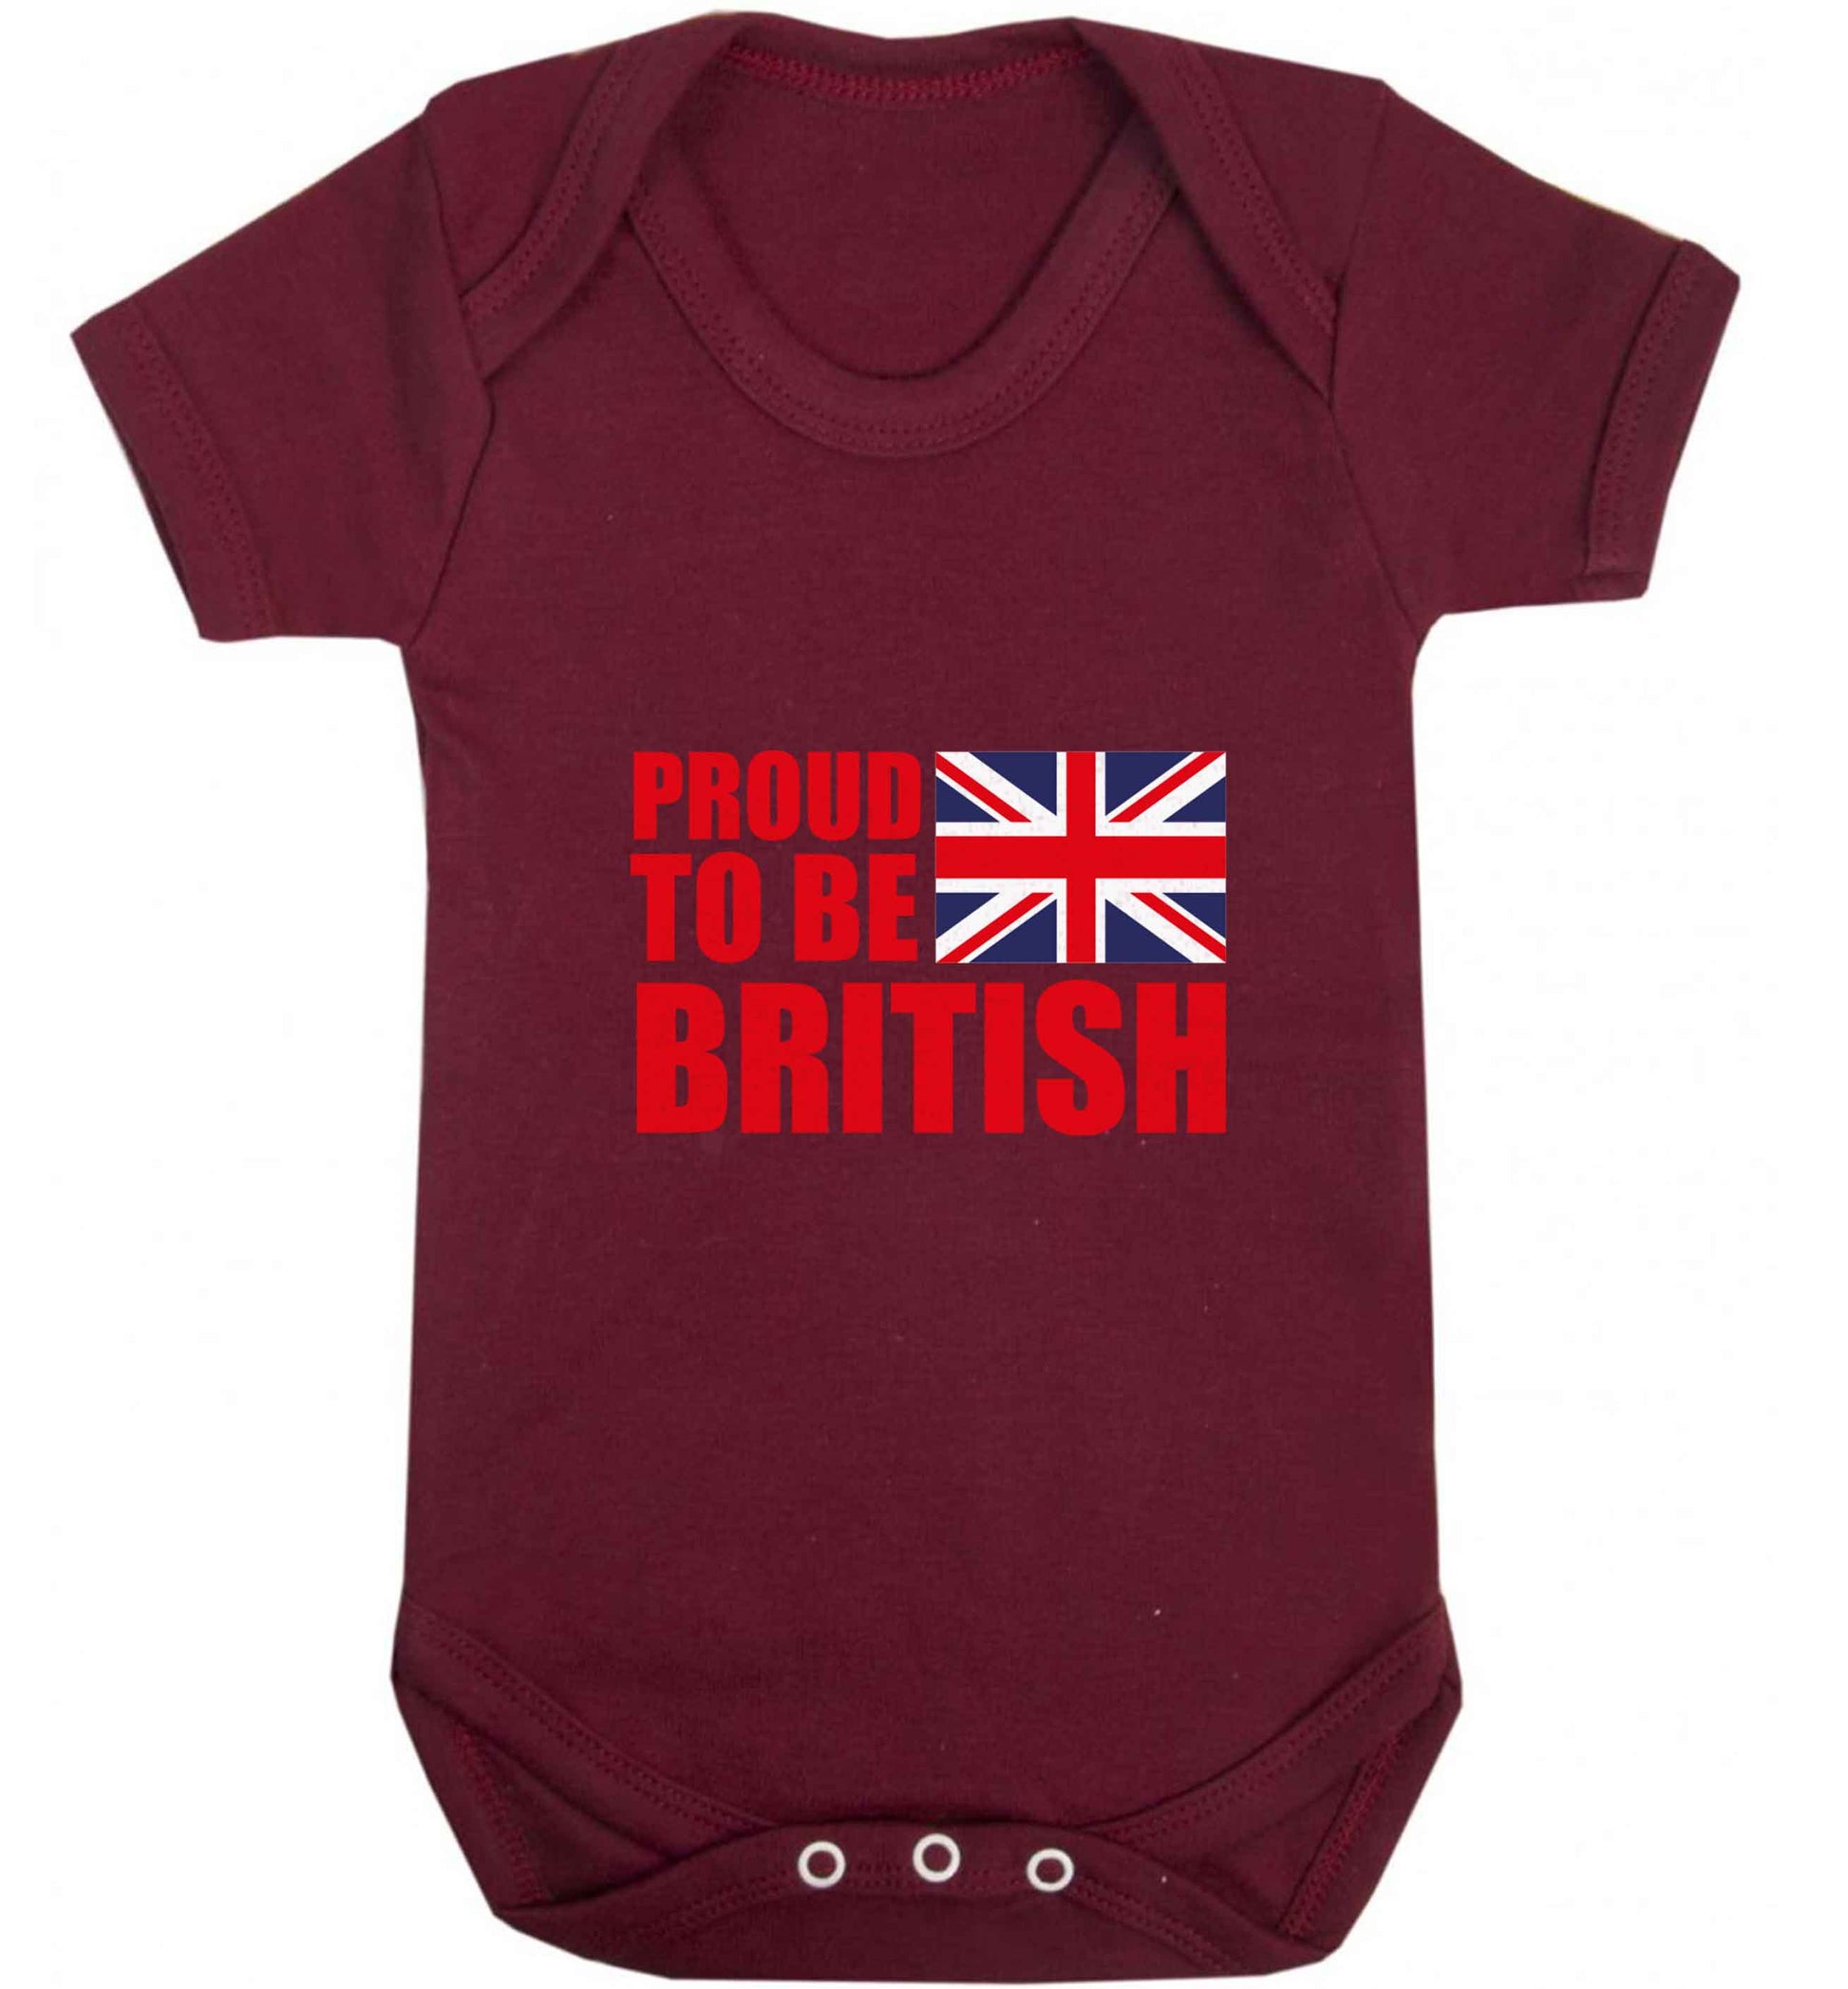 Proud to be British baby vest maroon 18-24 months